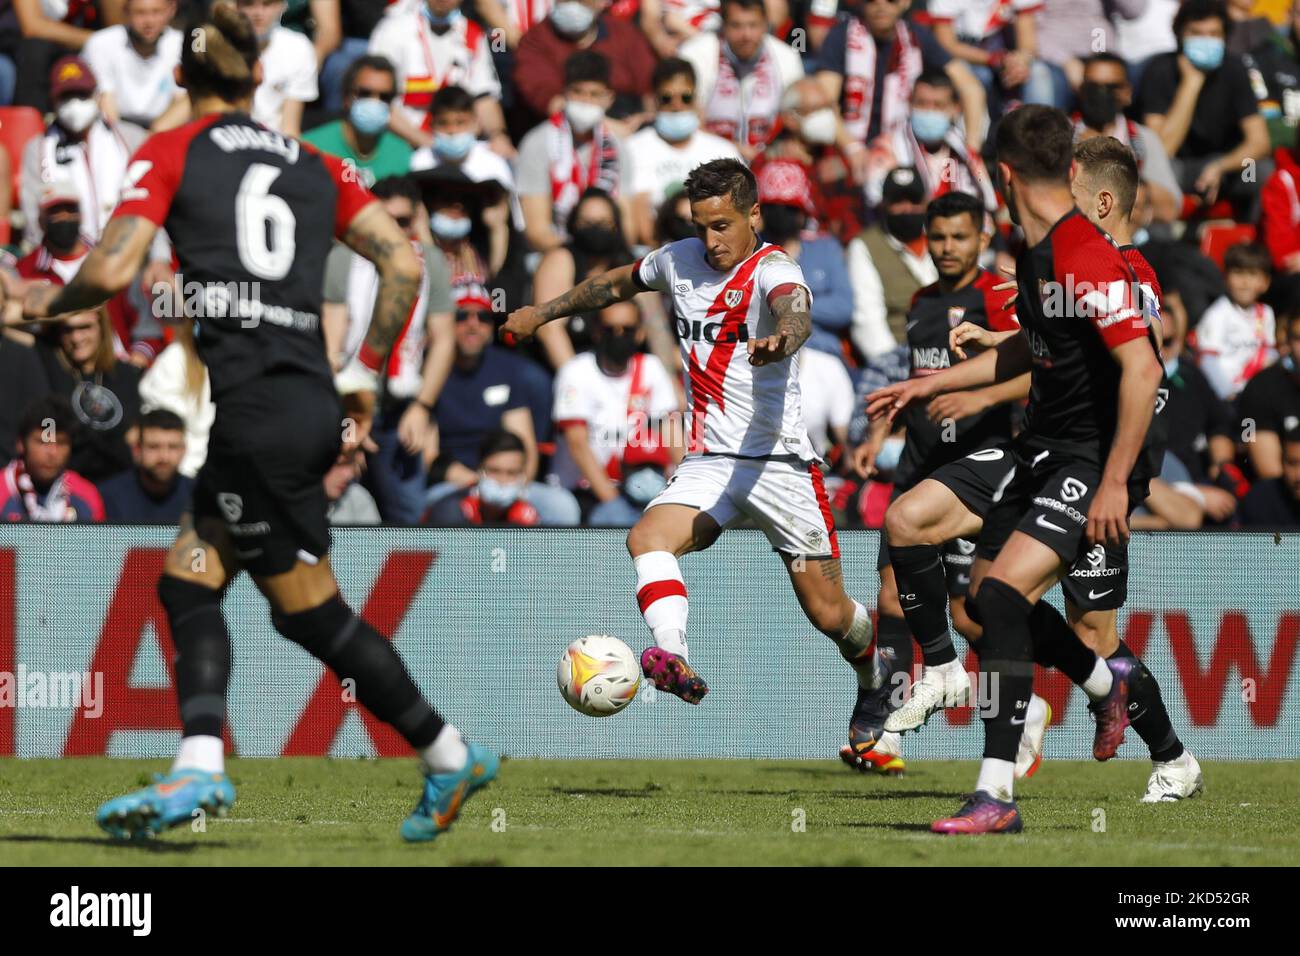 during the Liga match between Rayo Vallecano and Sevilla FC at Estadio de Vallecas in Barcelona, Spain. (Photo by DAX Images/NurPhoto) Stock Photo